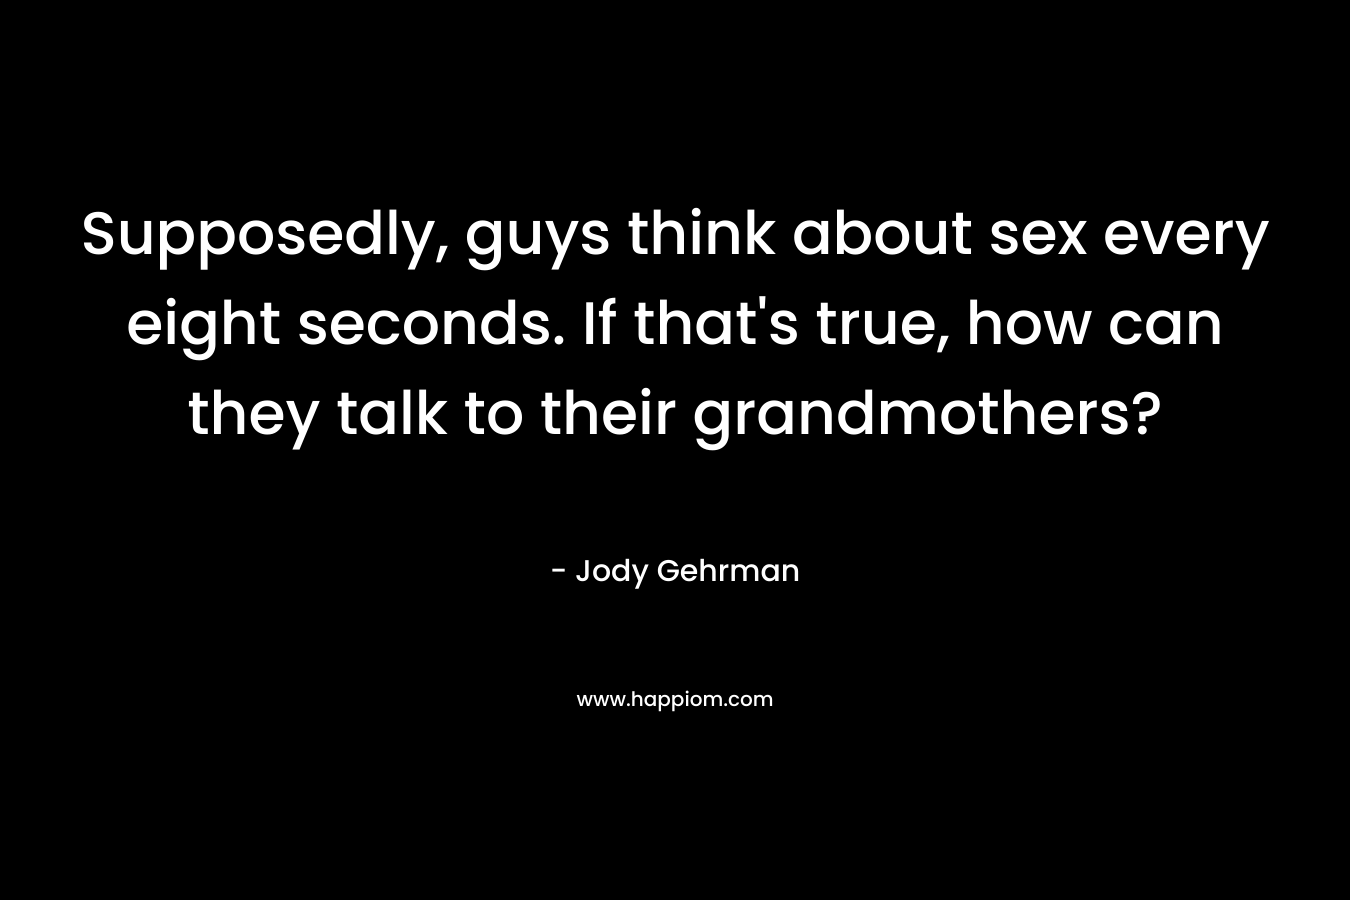 Supposedly, guys think about sex every eight seconds. If that’s true, how can they talk to their grandmothers? – Jody Gehrman